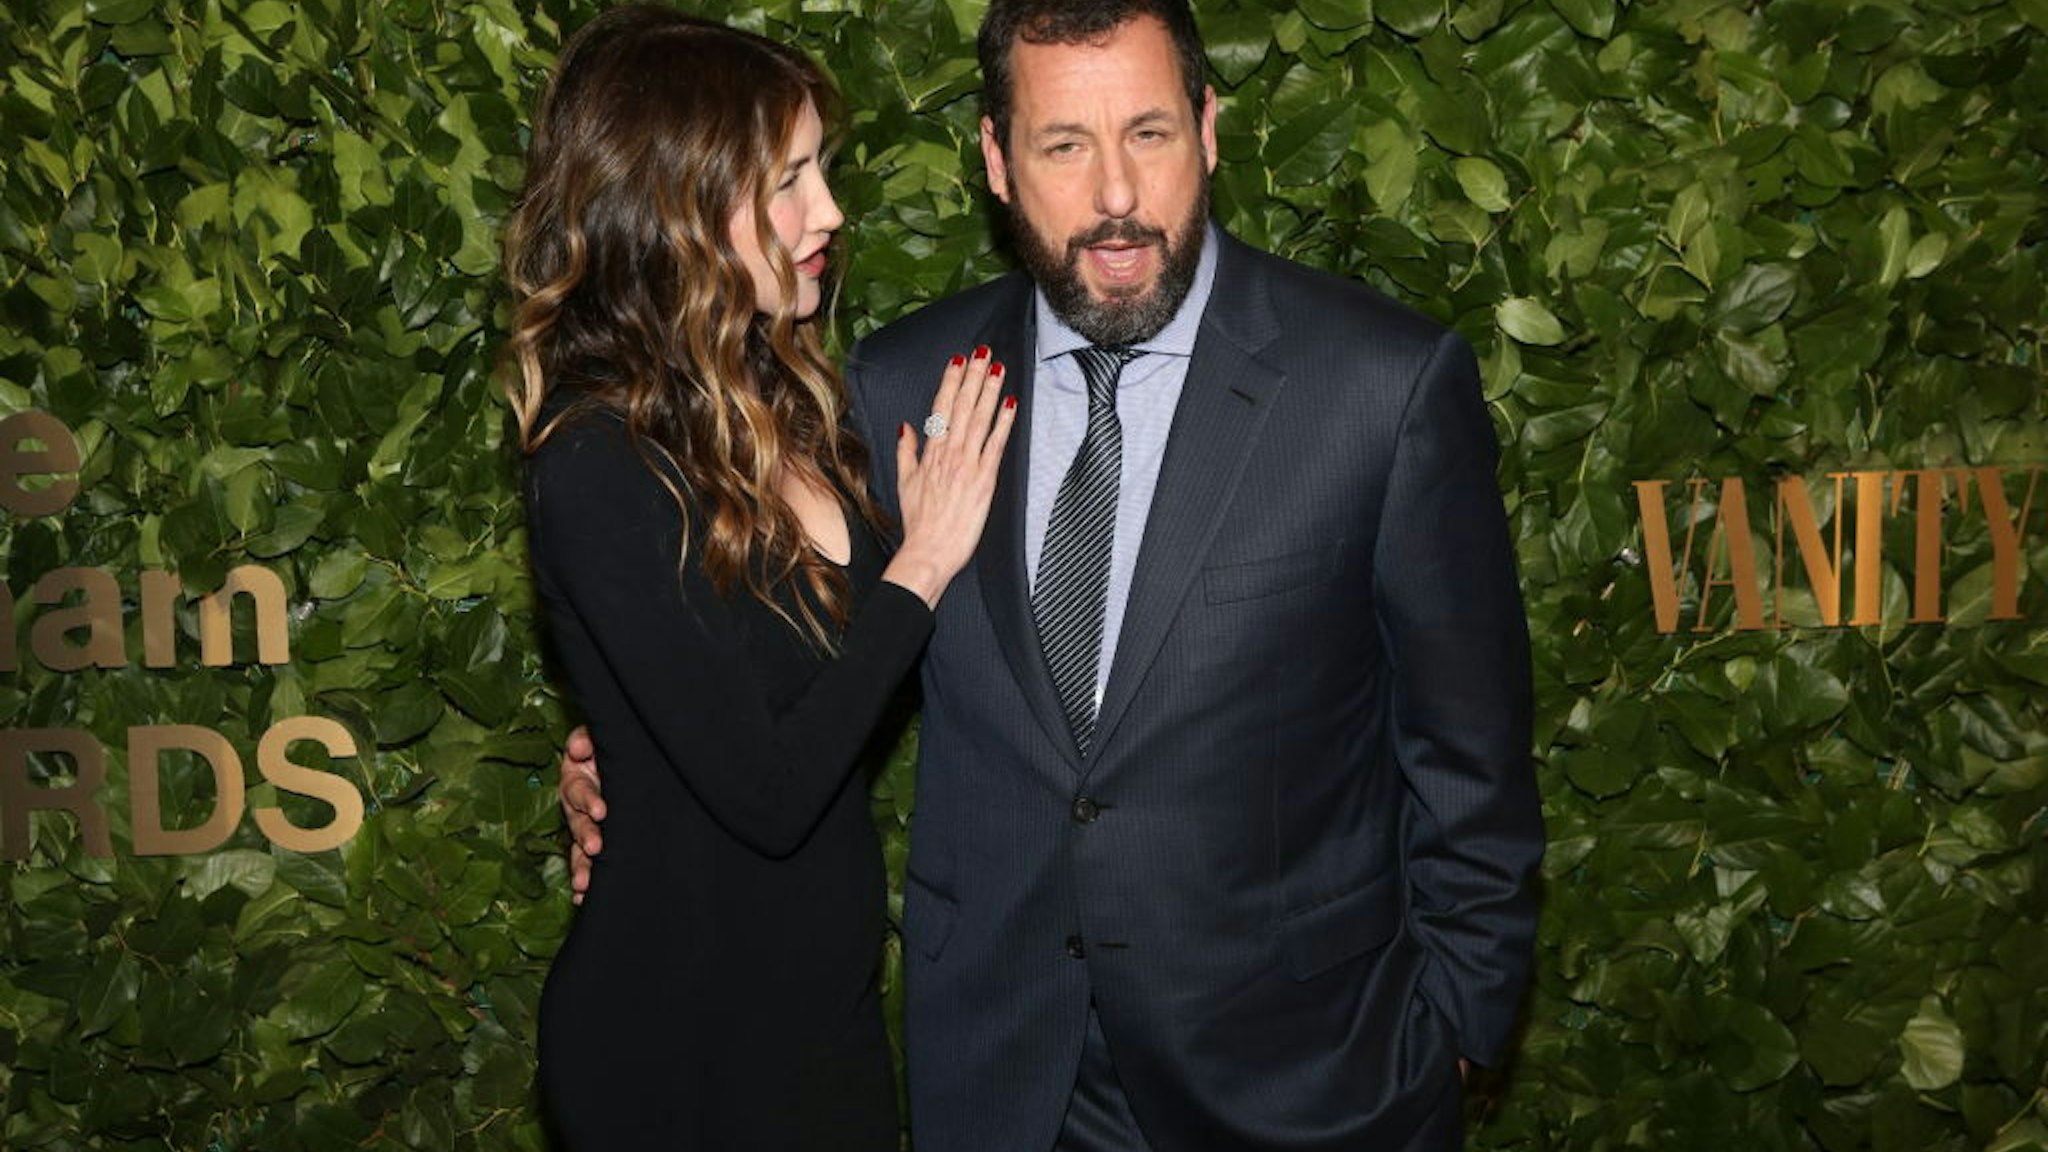 NEW YORK, NEW YORK - NOVEMBER 28: Jackie Sandler and Adam Sandler attend the 2022 Gotham Awards at Cipriani Wall Street on November 28, 2022 in New York City. (Photo by Udo Salters/Patrick McMullan via Getty Images)